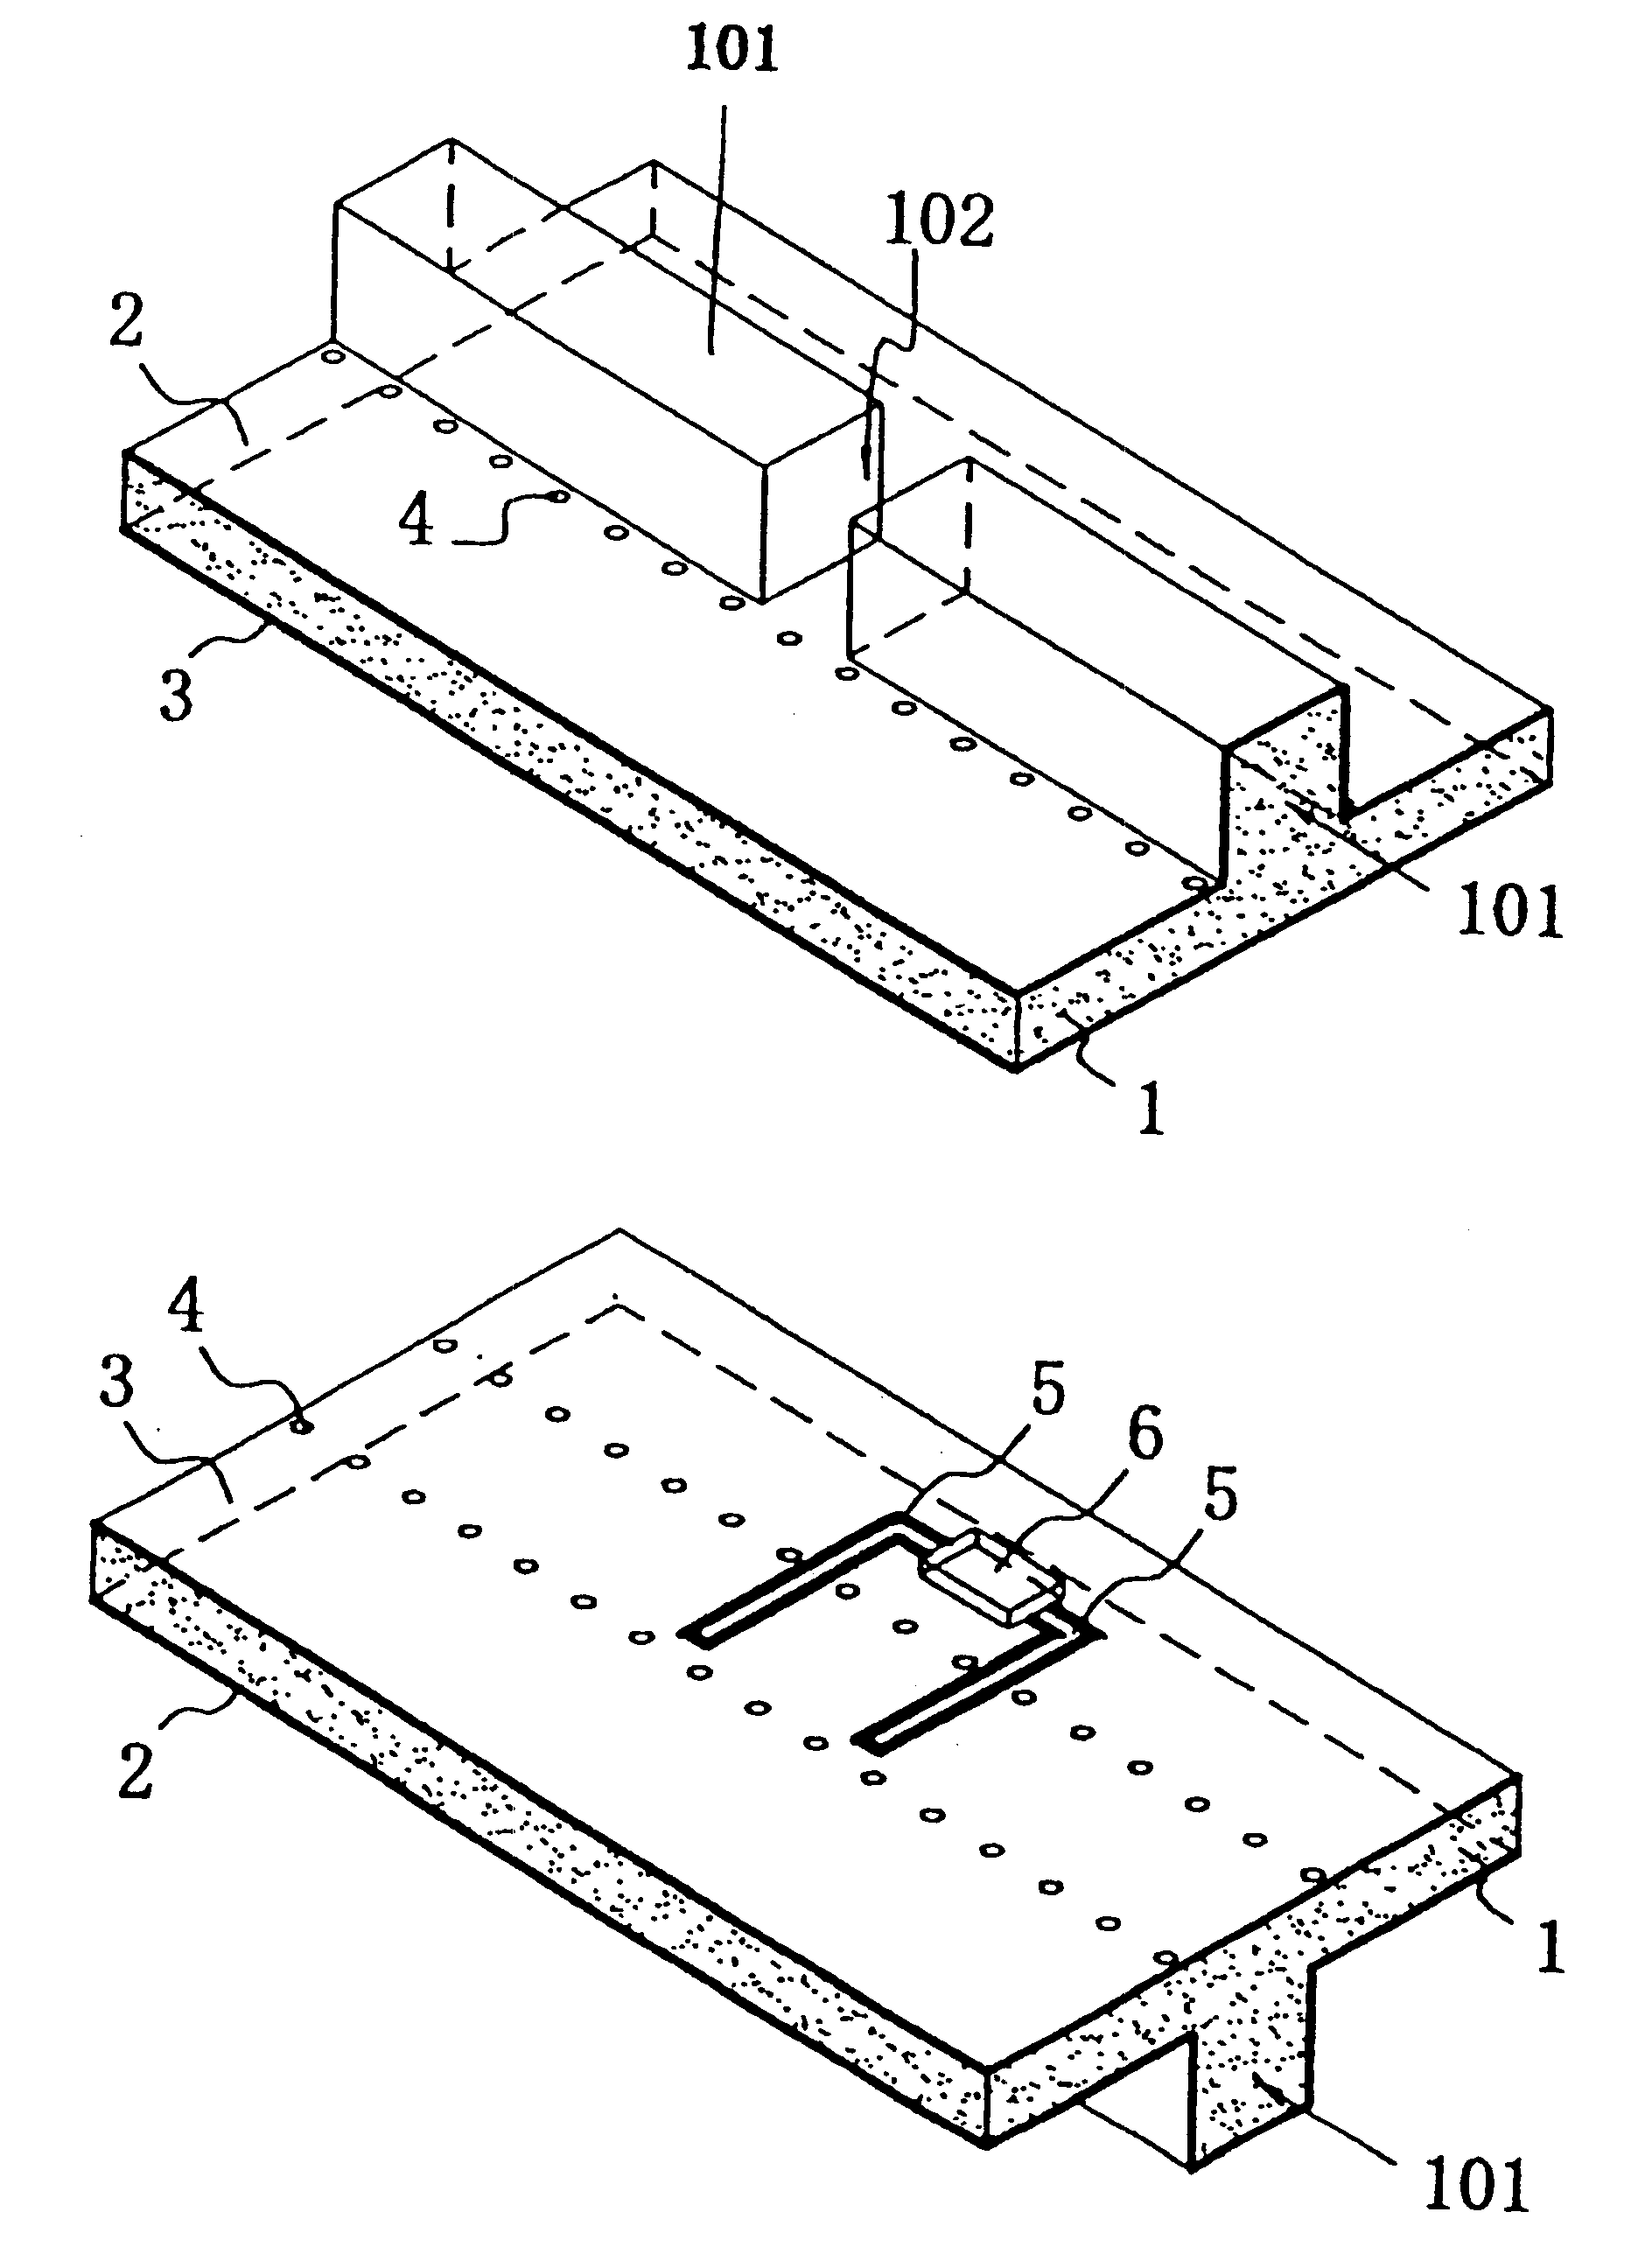 Transmission line, integrated circuit, and transmitter receiver